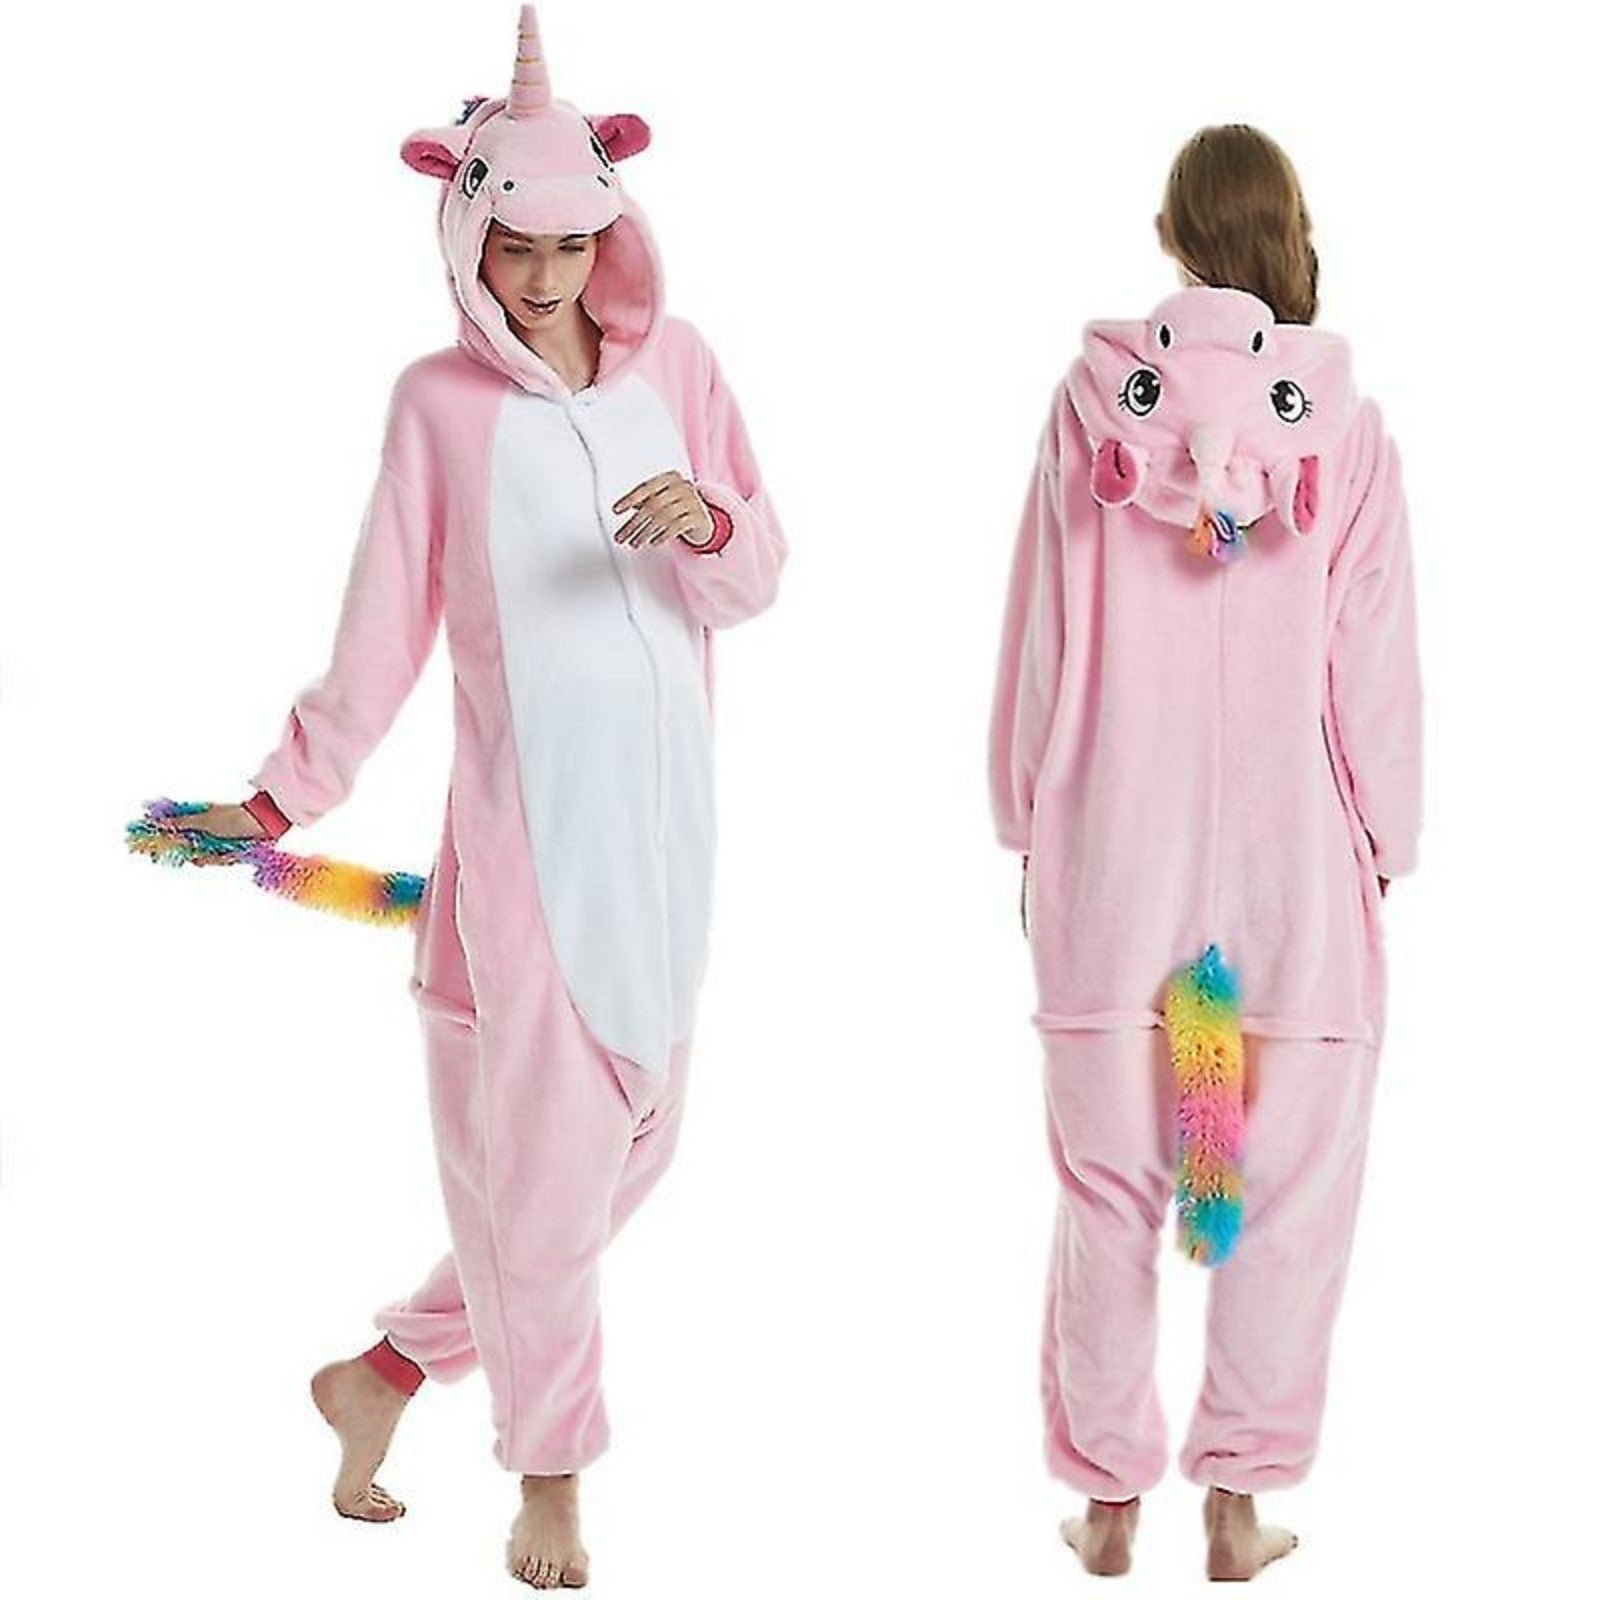 Pink Unicorn Costume Halloween Outfit Pajamas SMALL and LARGE Cqj68nsc8